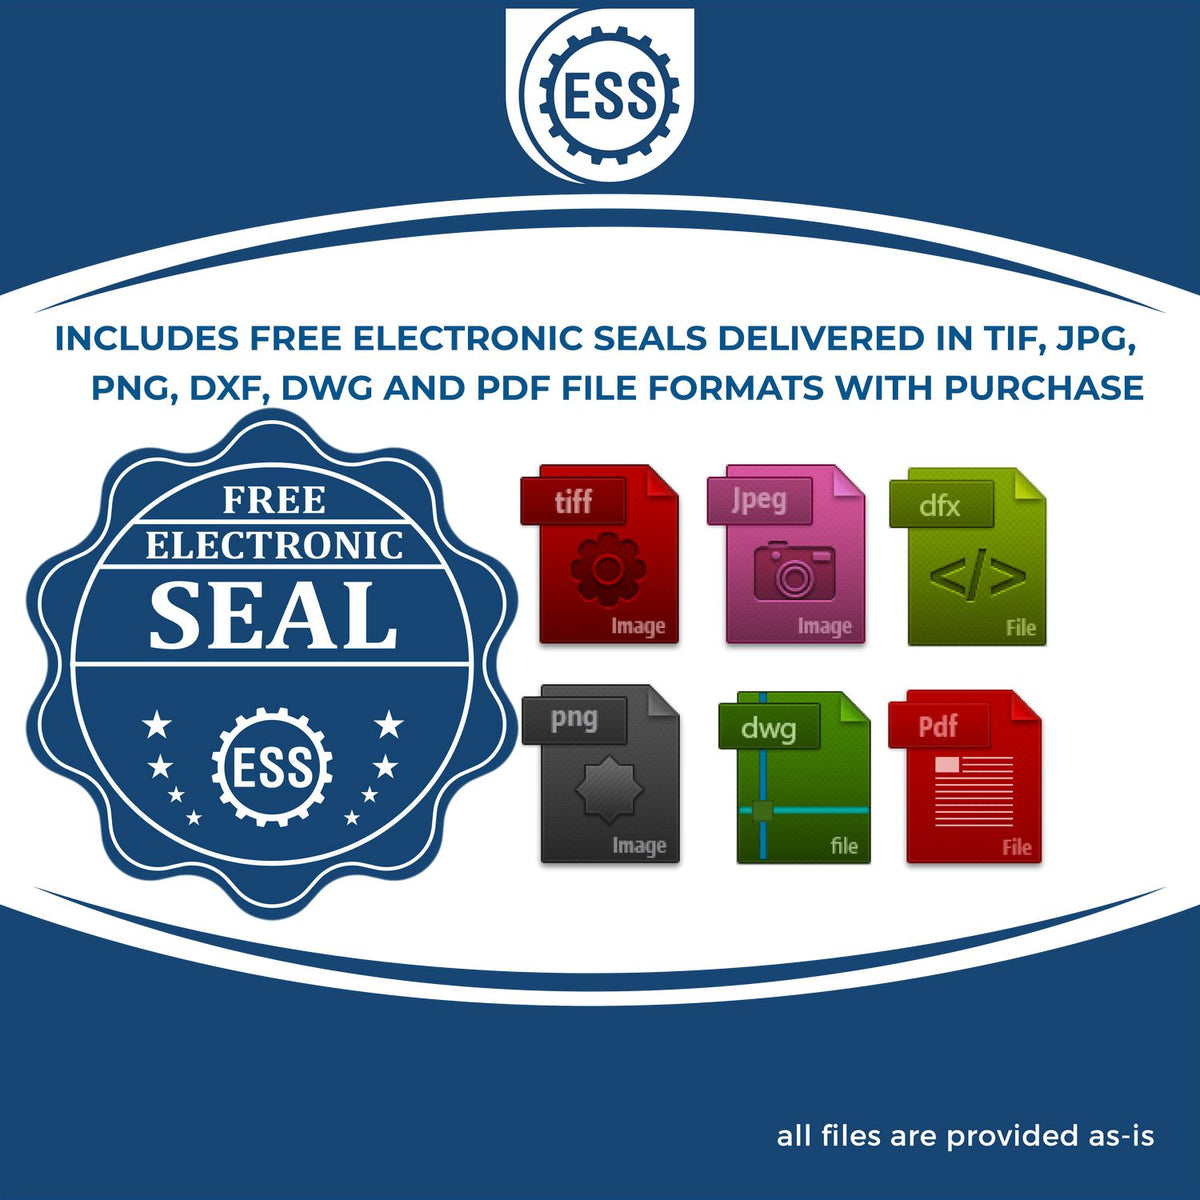 An infographic for the free electronic seal for the Slim Pre-Inked Arizona Architect Seal Stamp illustrating the different file type icons such as DXF, DWG, TIF, JPG and PNG.